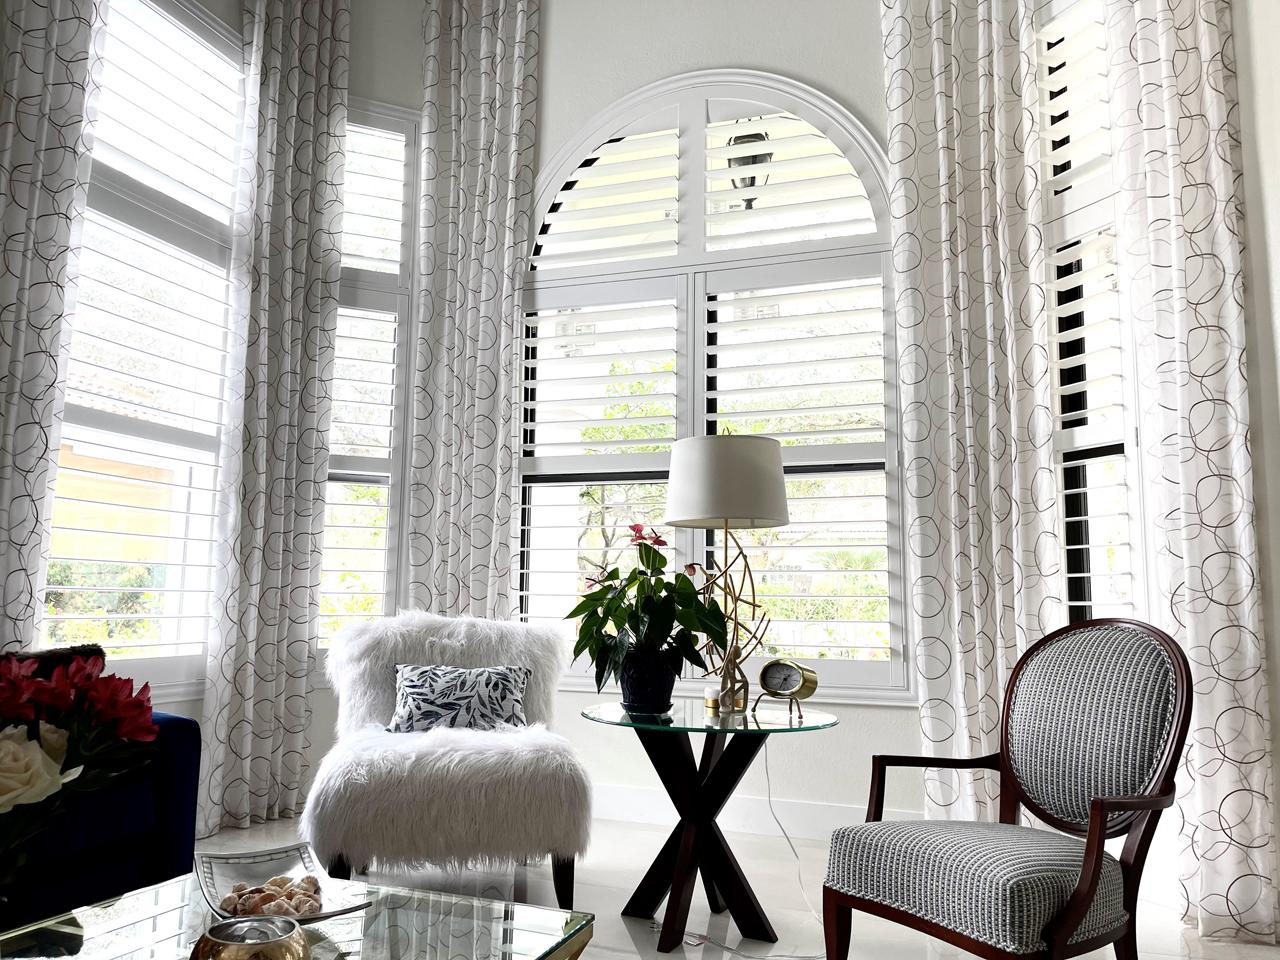 Arched window with shutters and drapes in living room